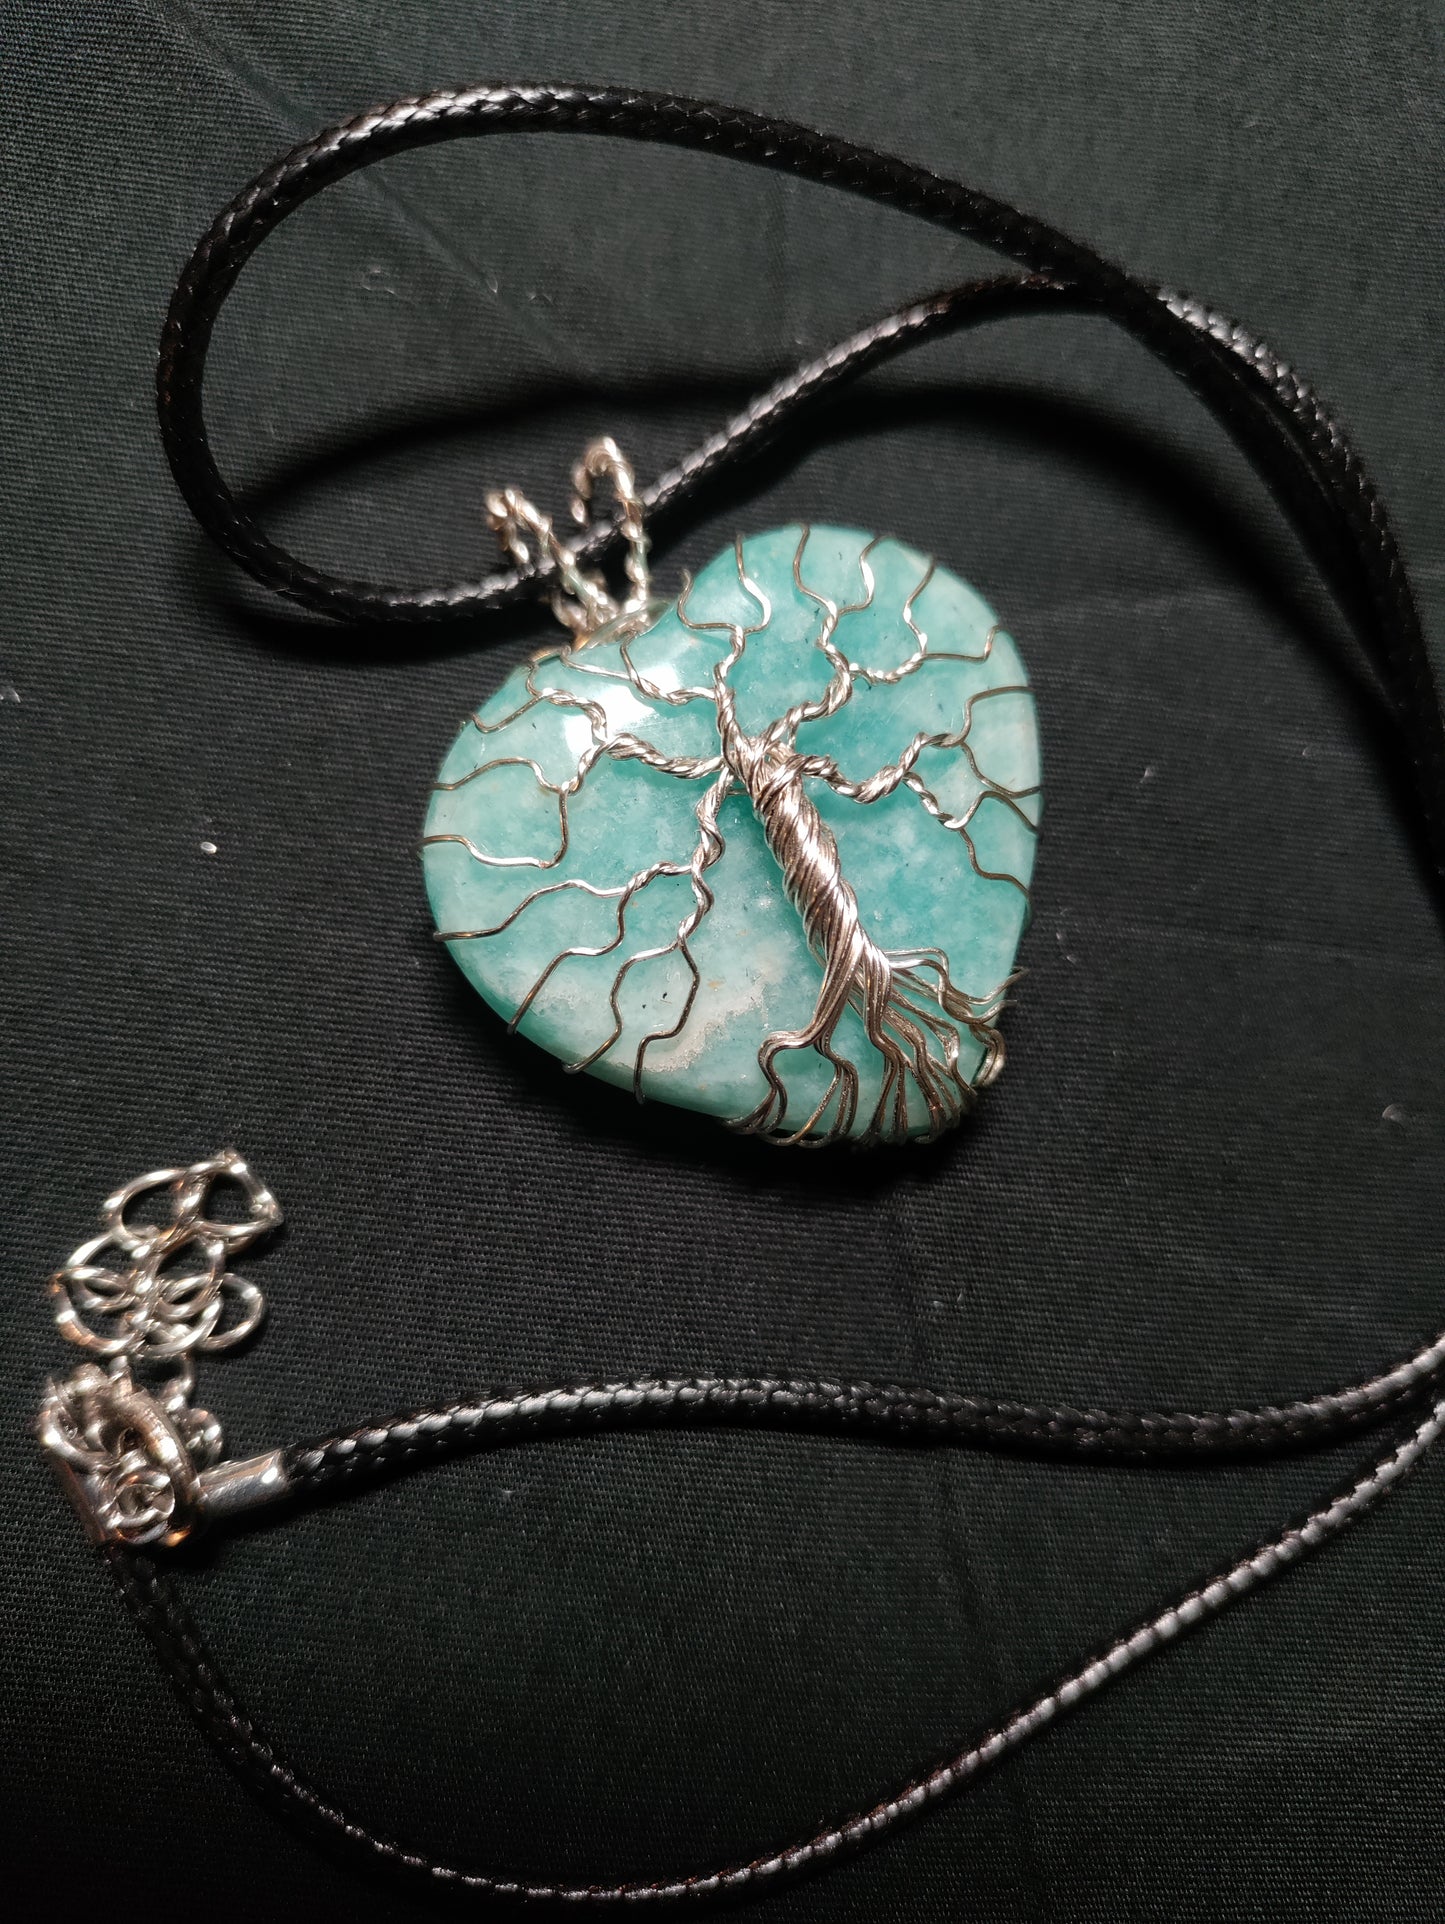 Tree Of Life Necklace - Amazonite Heart & Silver